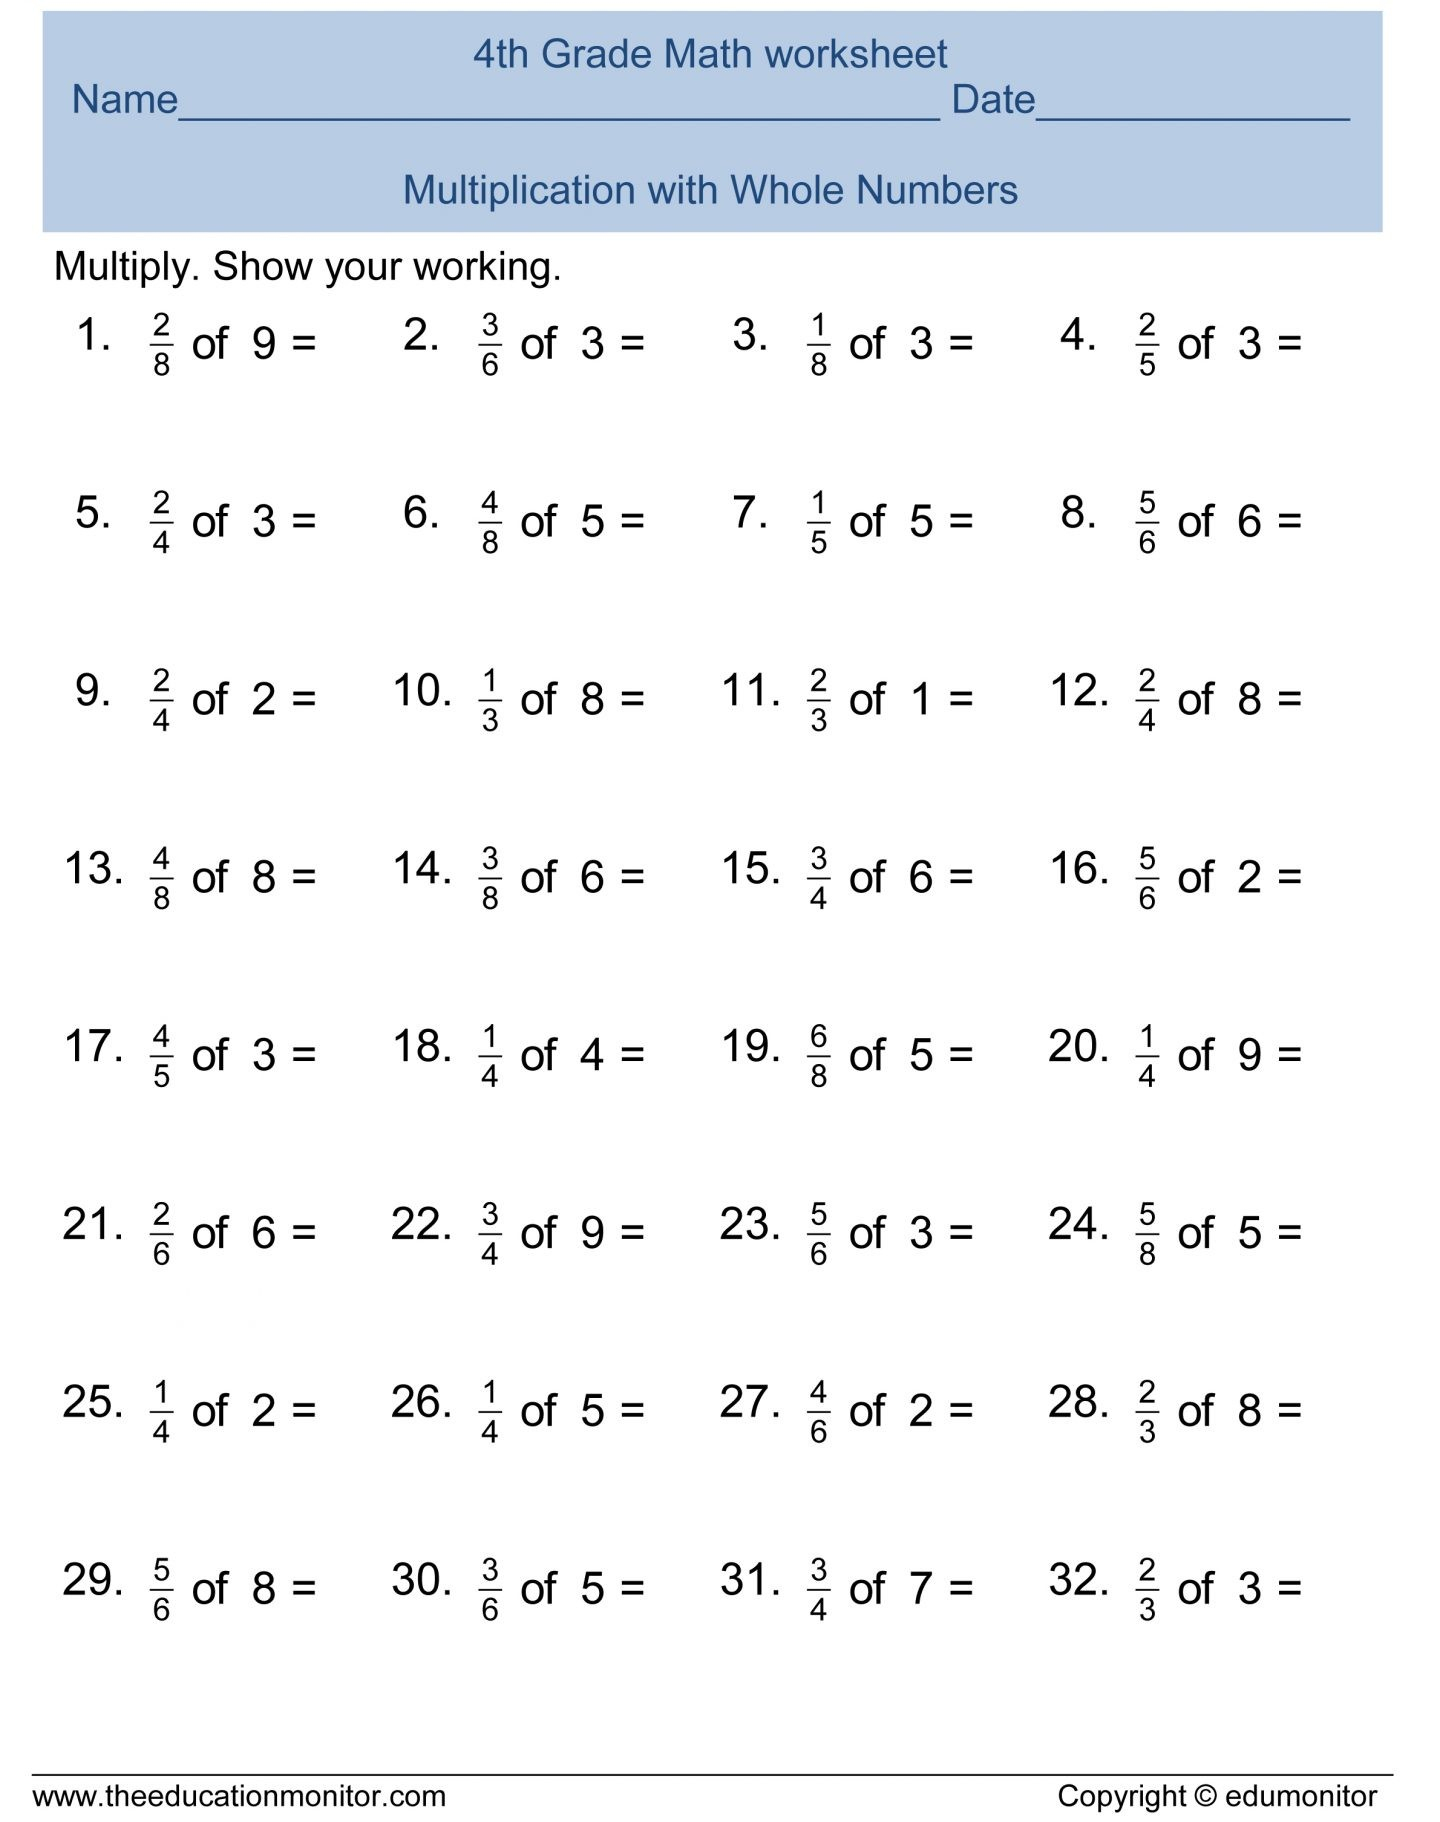  7Th Grade Math Worksheets Free Printable With Answers Free Printable